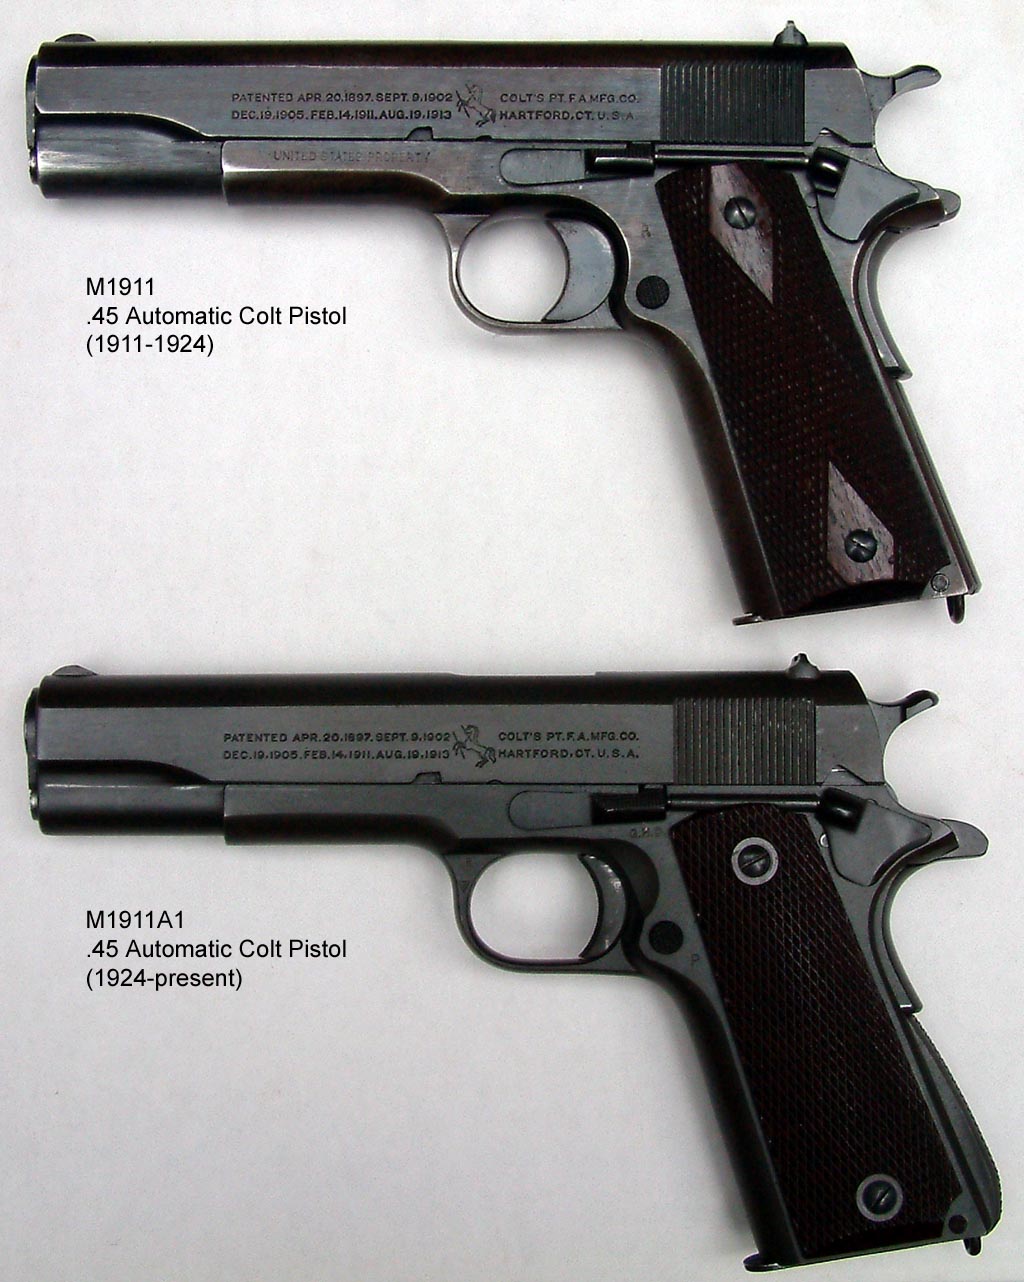 m1911_and_m1911a1_pistols